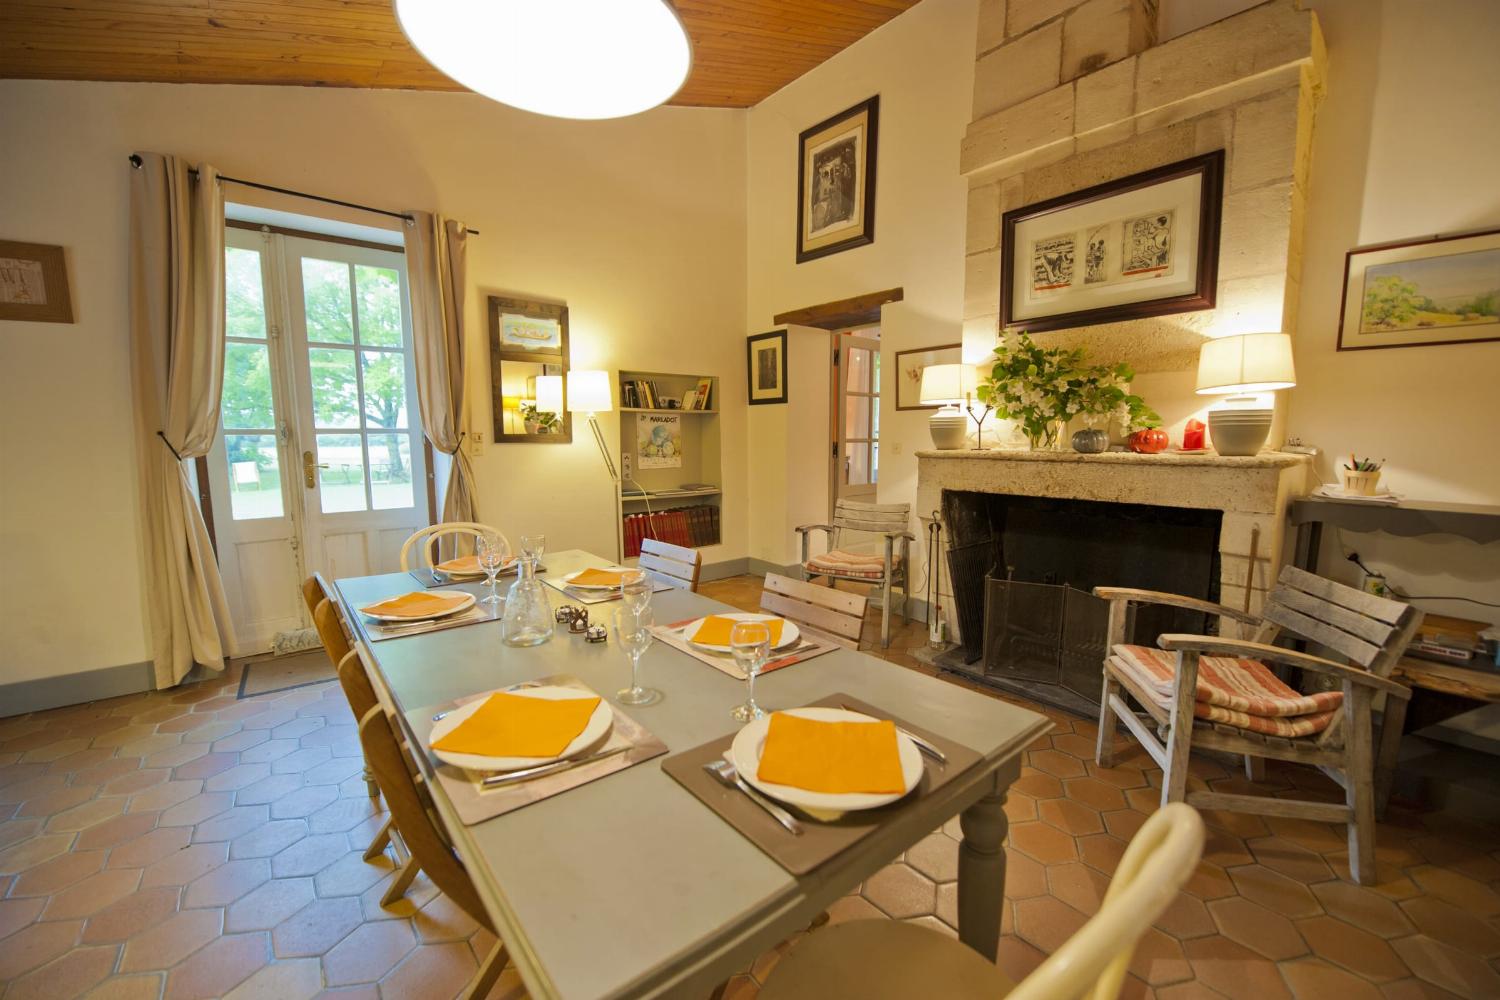 Dining room | Rental home in Gironde